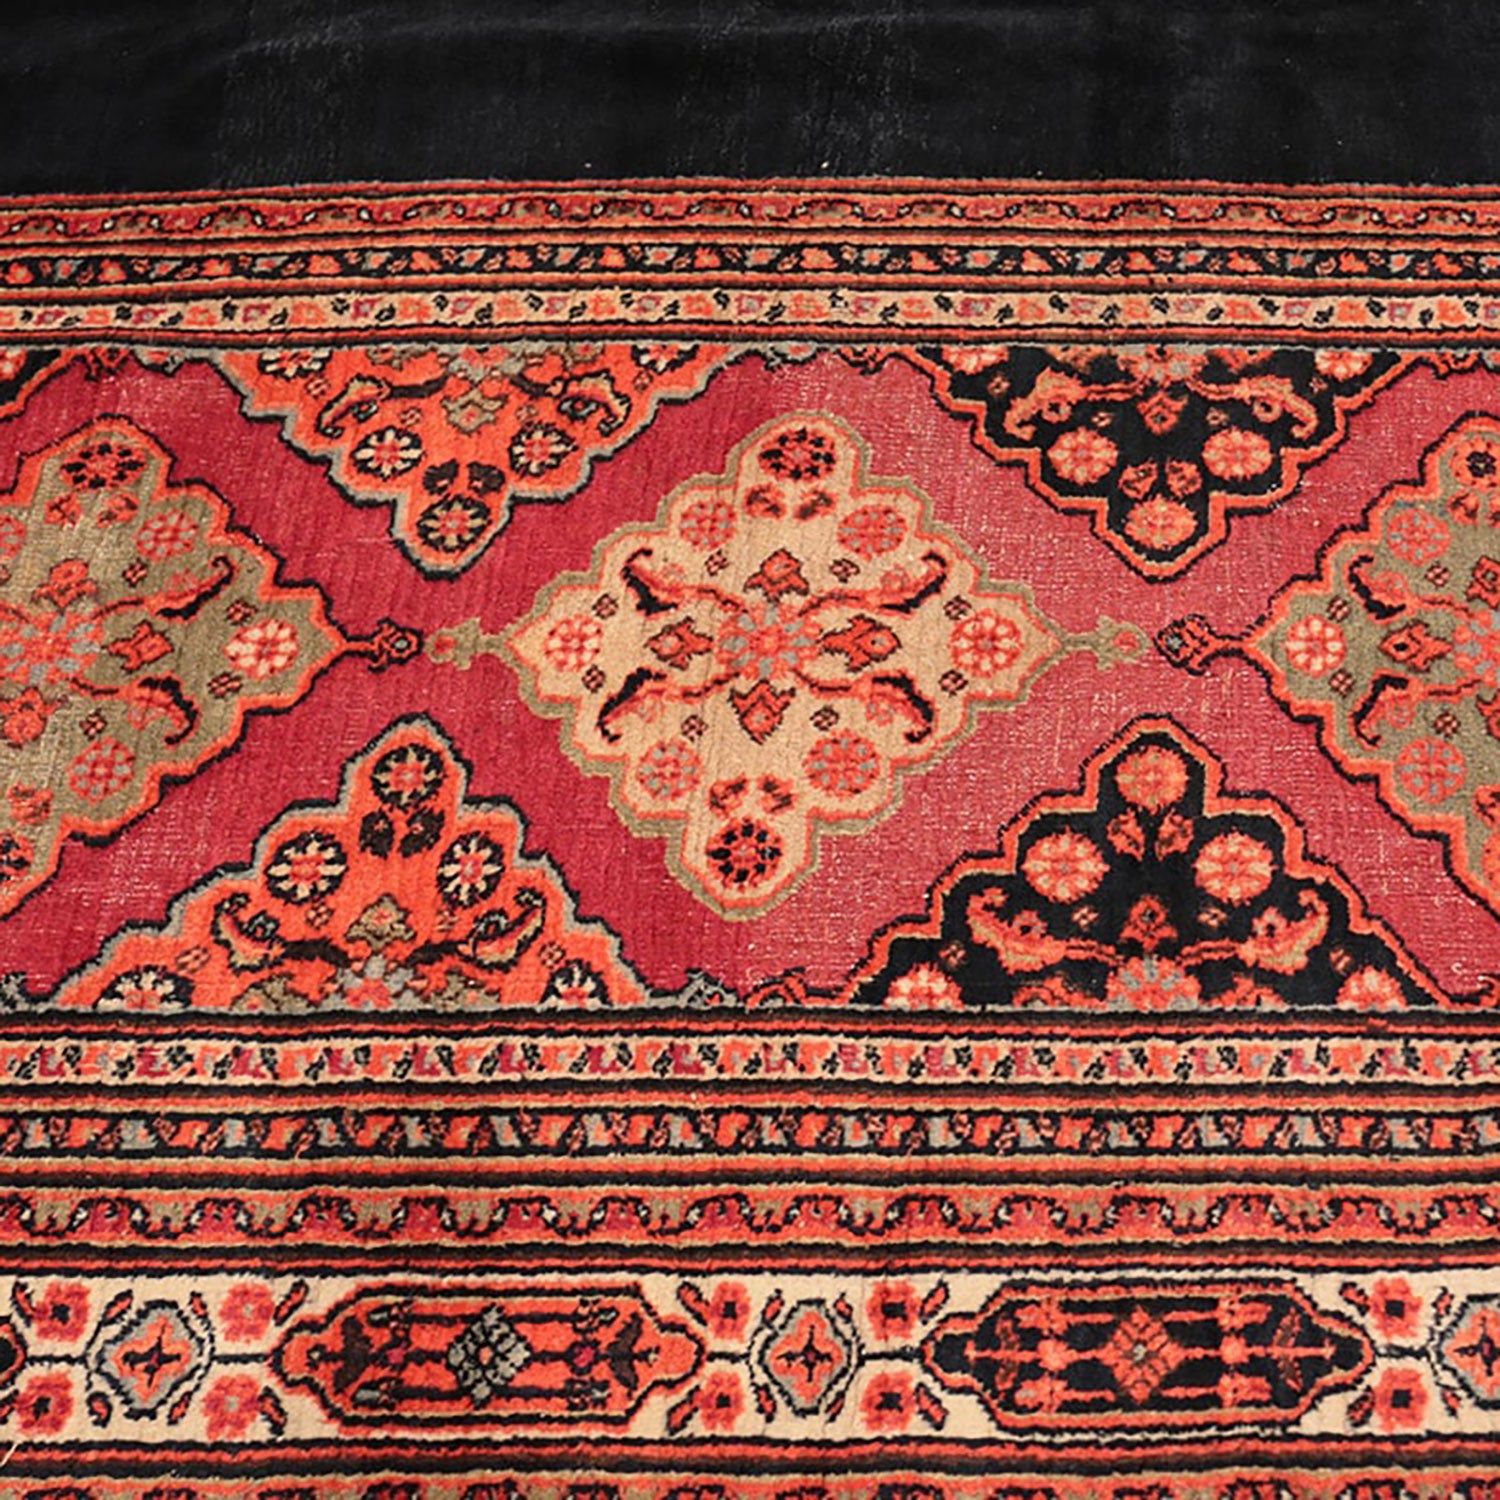 An ornate, handwoven rug with traditional design in vibrant colors.